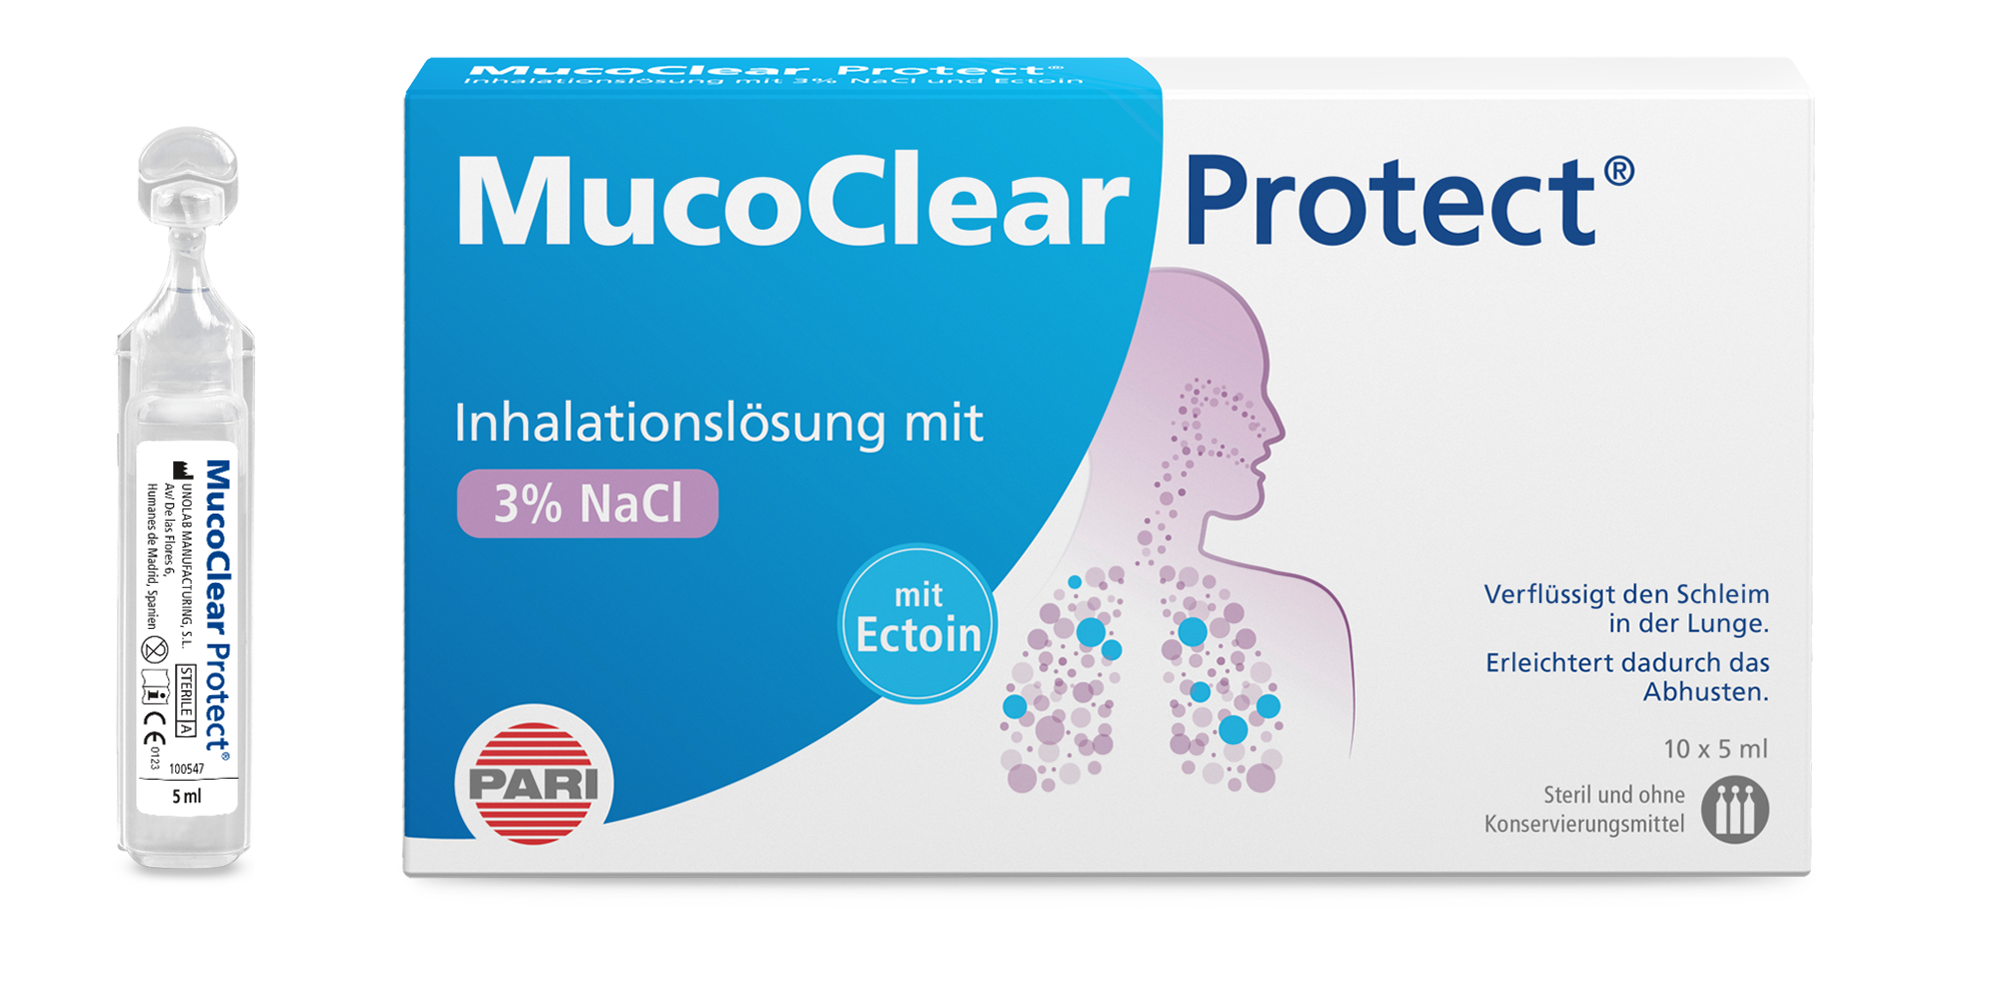 MucoClear Protect